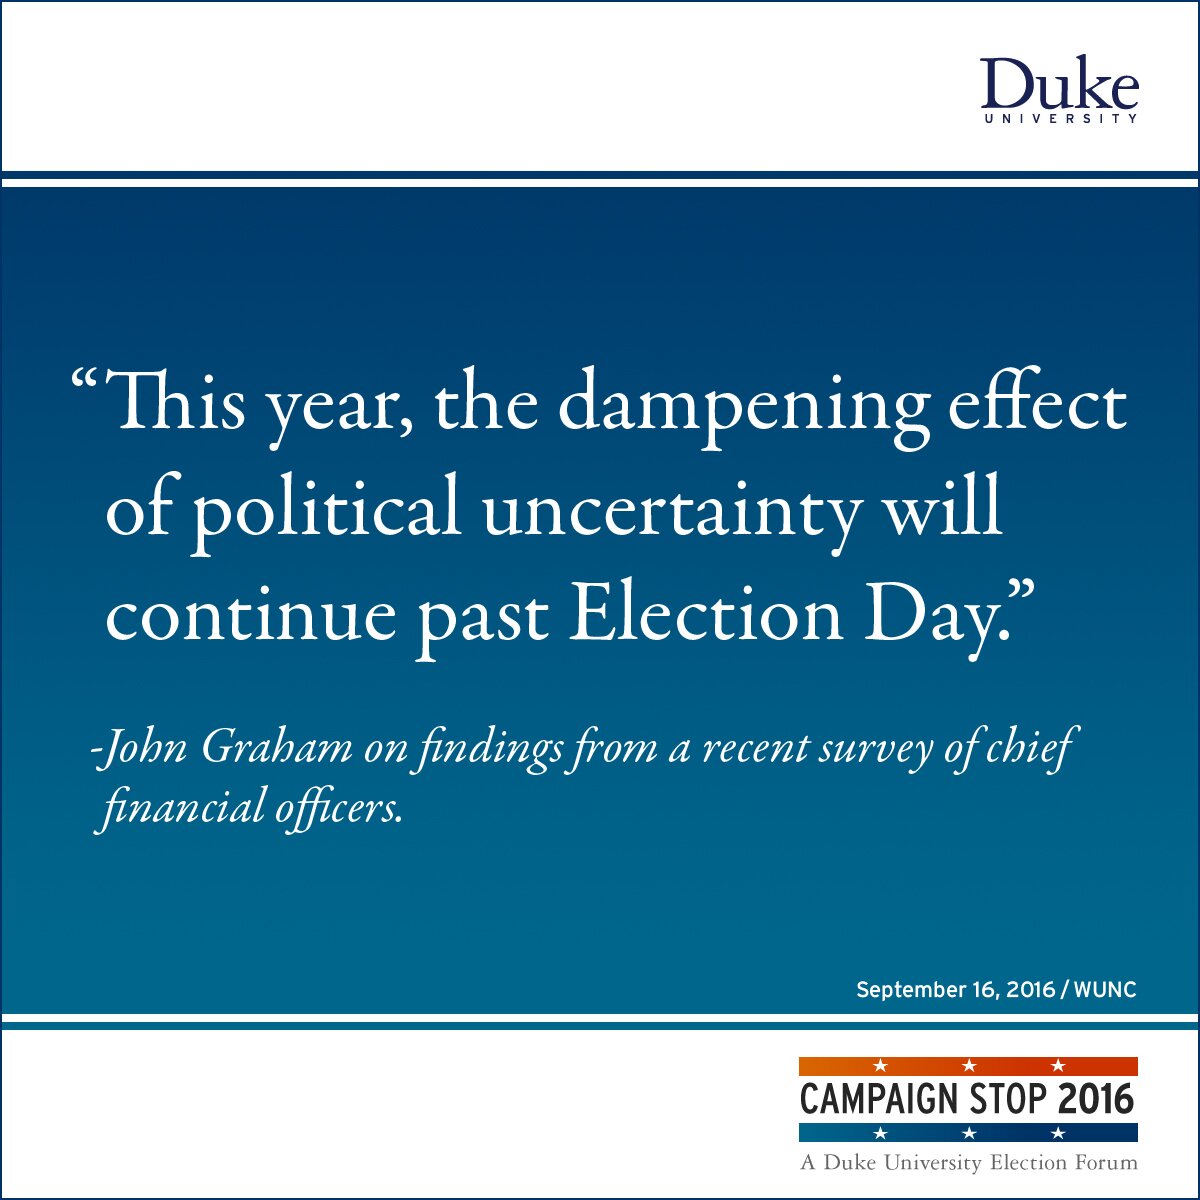 “This year, the dampening effect of political uncertainty will continue past Election Day.” -John Graham on findings from a recent survey of chief financial officers.